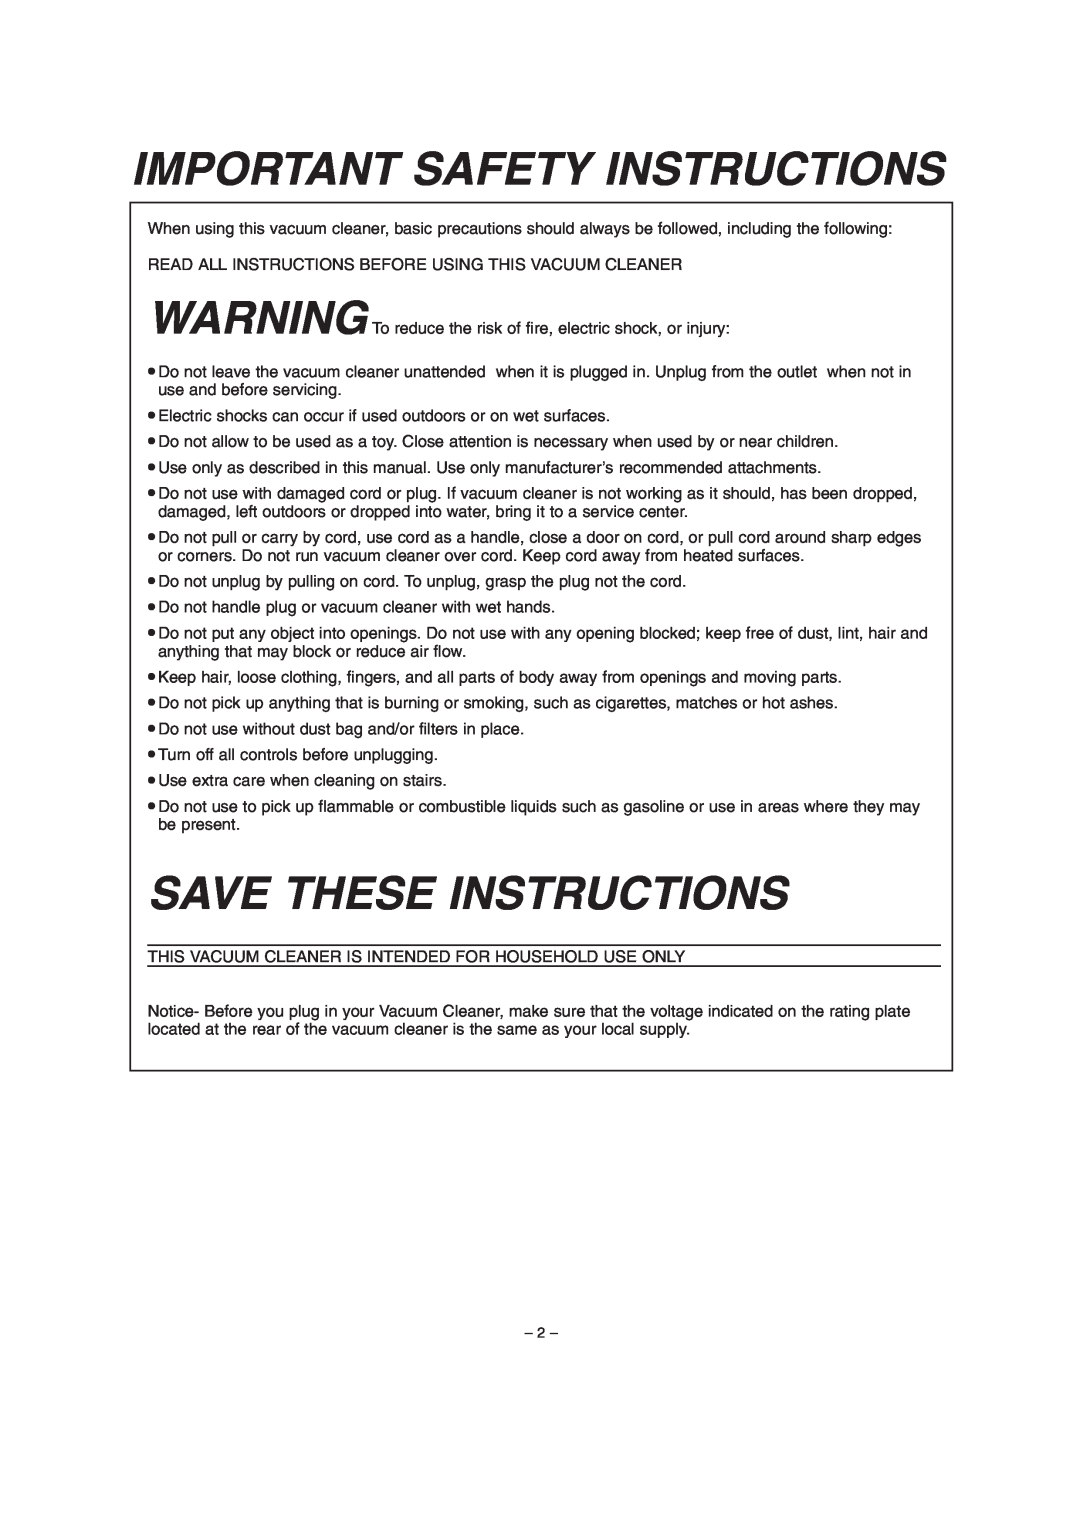 Miele S179i important safety instructions Important Safety Instructions, Save These Instructions 